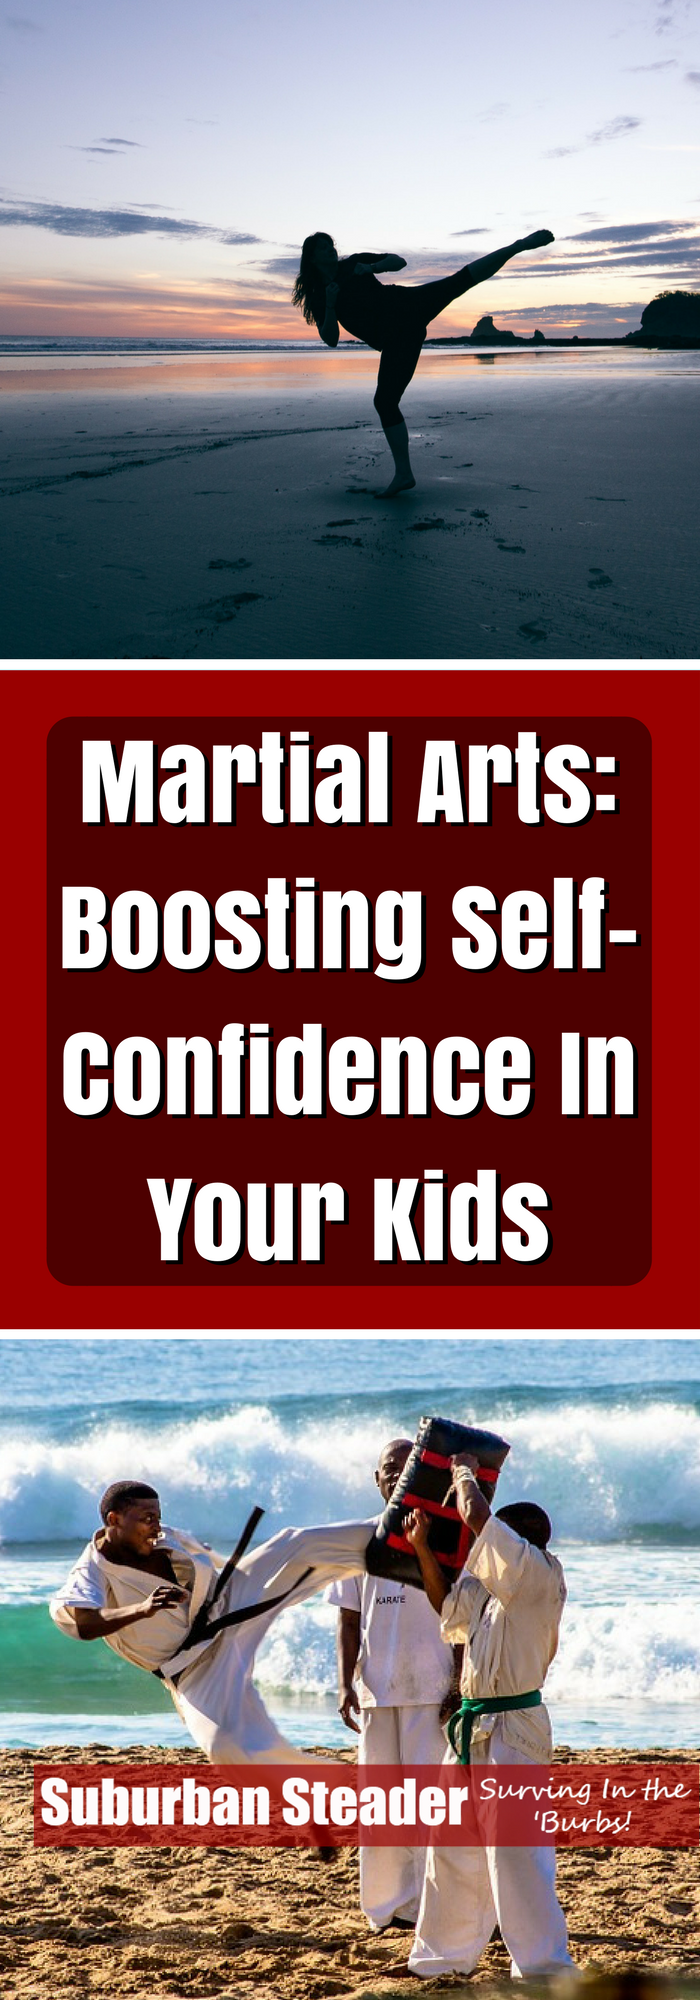 Martial Arts: Boosting Self-Confidence In Your Kids